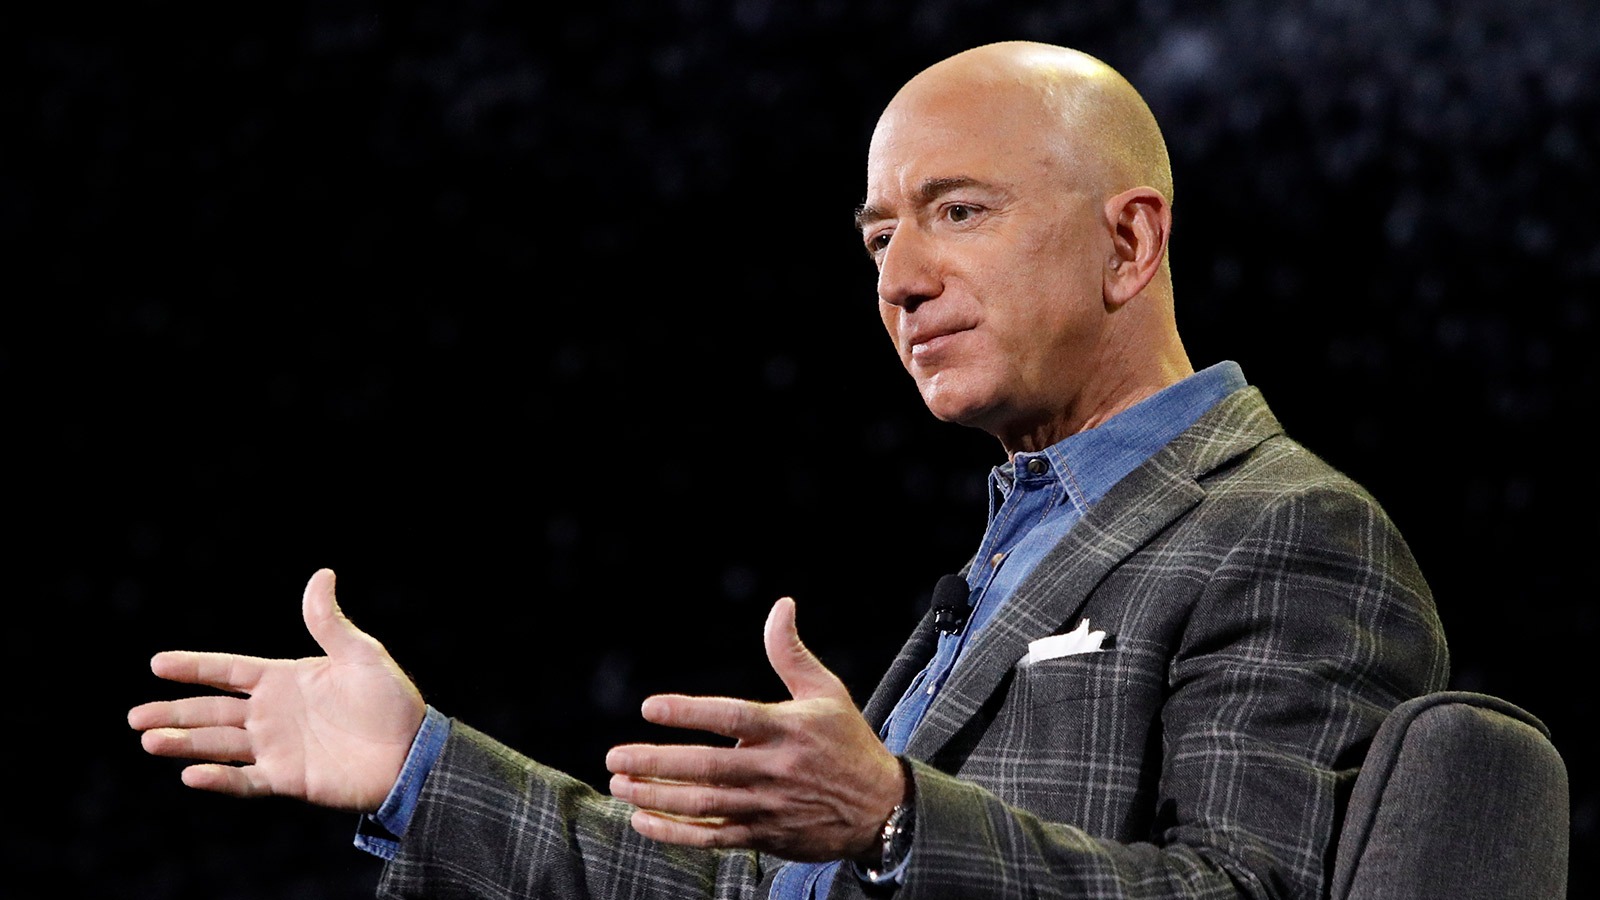 How Jeff Bezos and Amazon changed the world